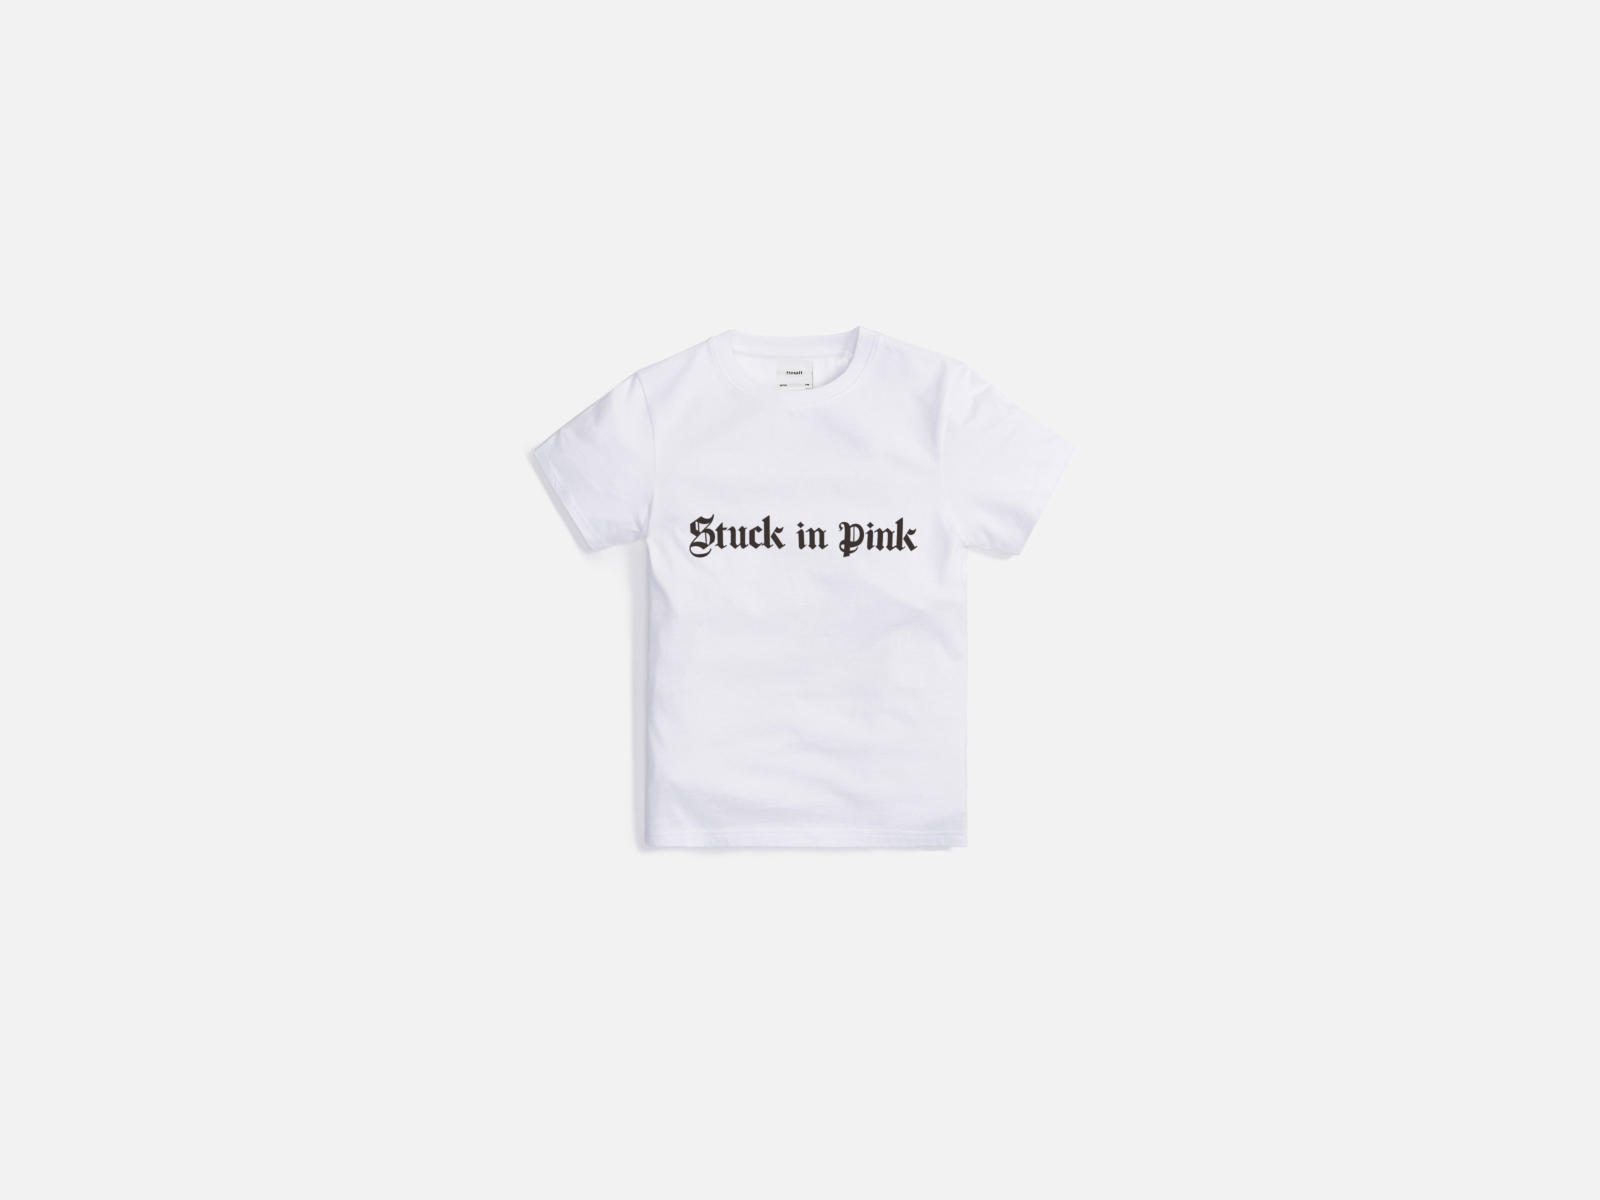 Stack in Pink Pinkpanther Tee kids front